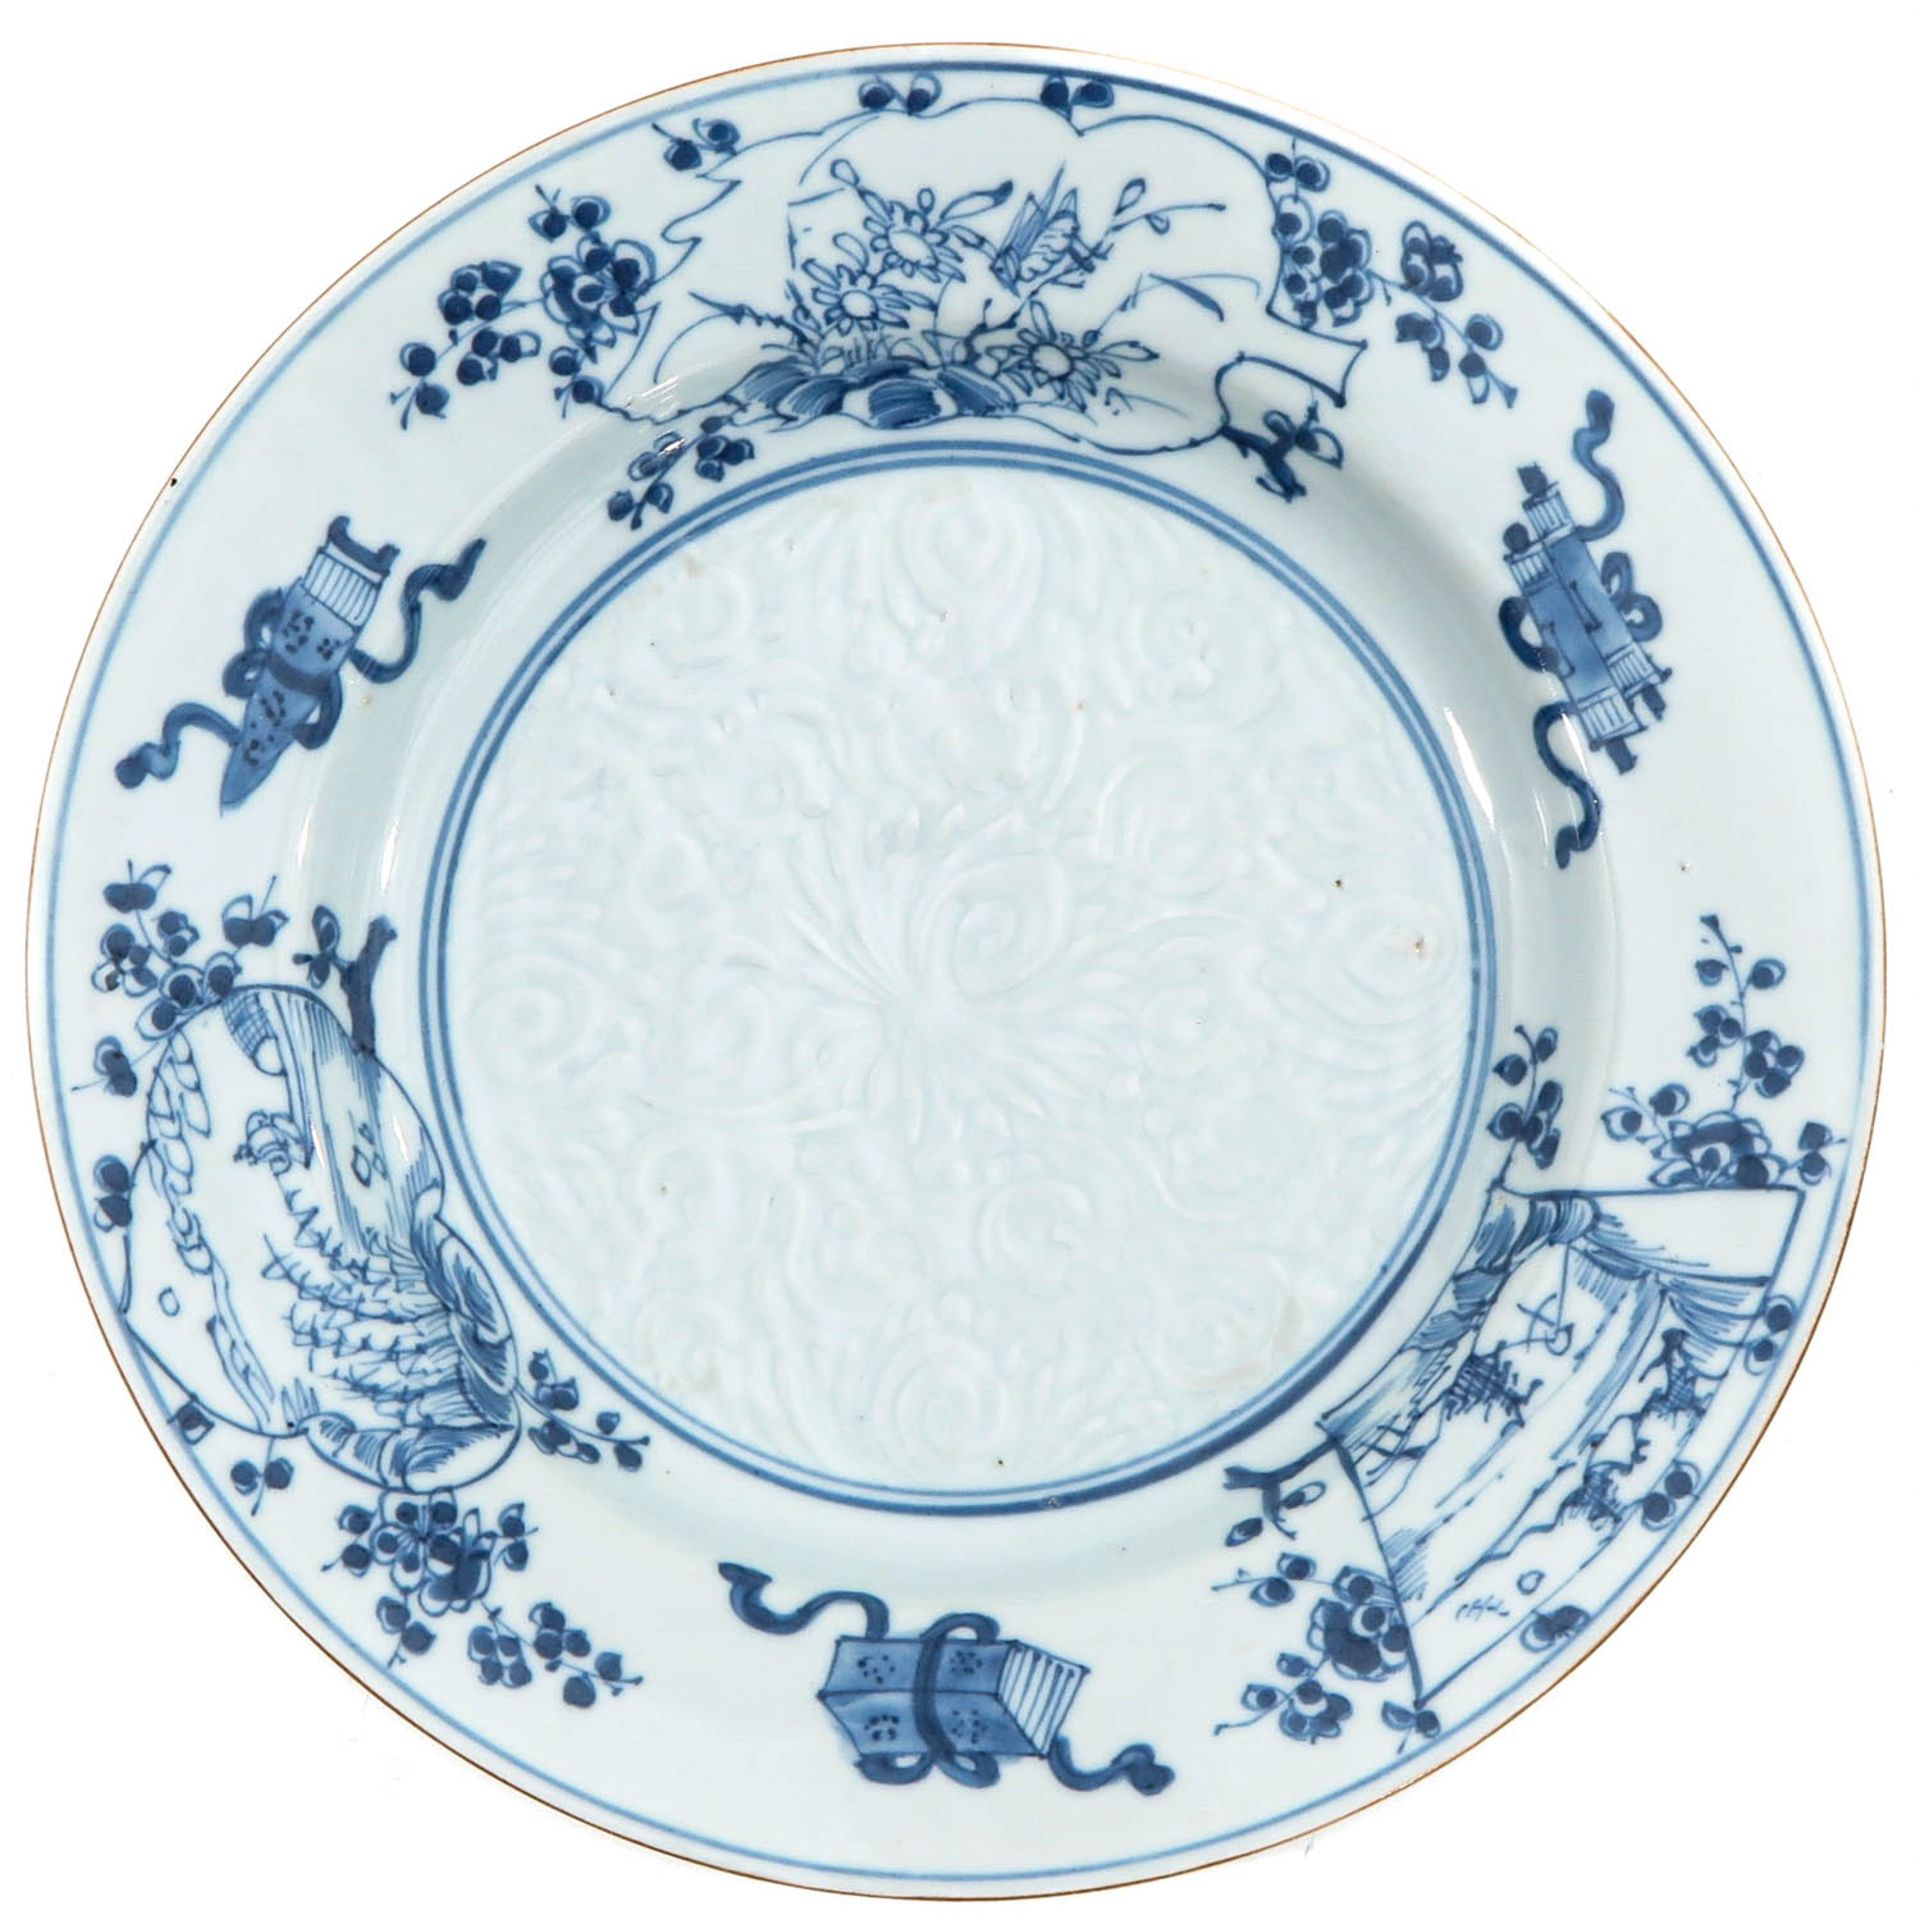 A Collection of 3 Blue and White Plates - Bild 5 aus 10